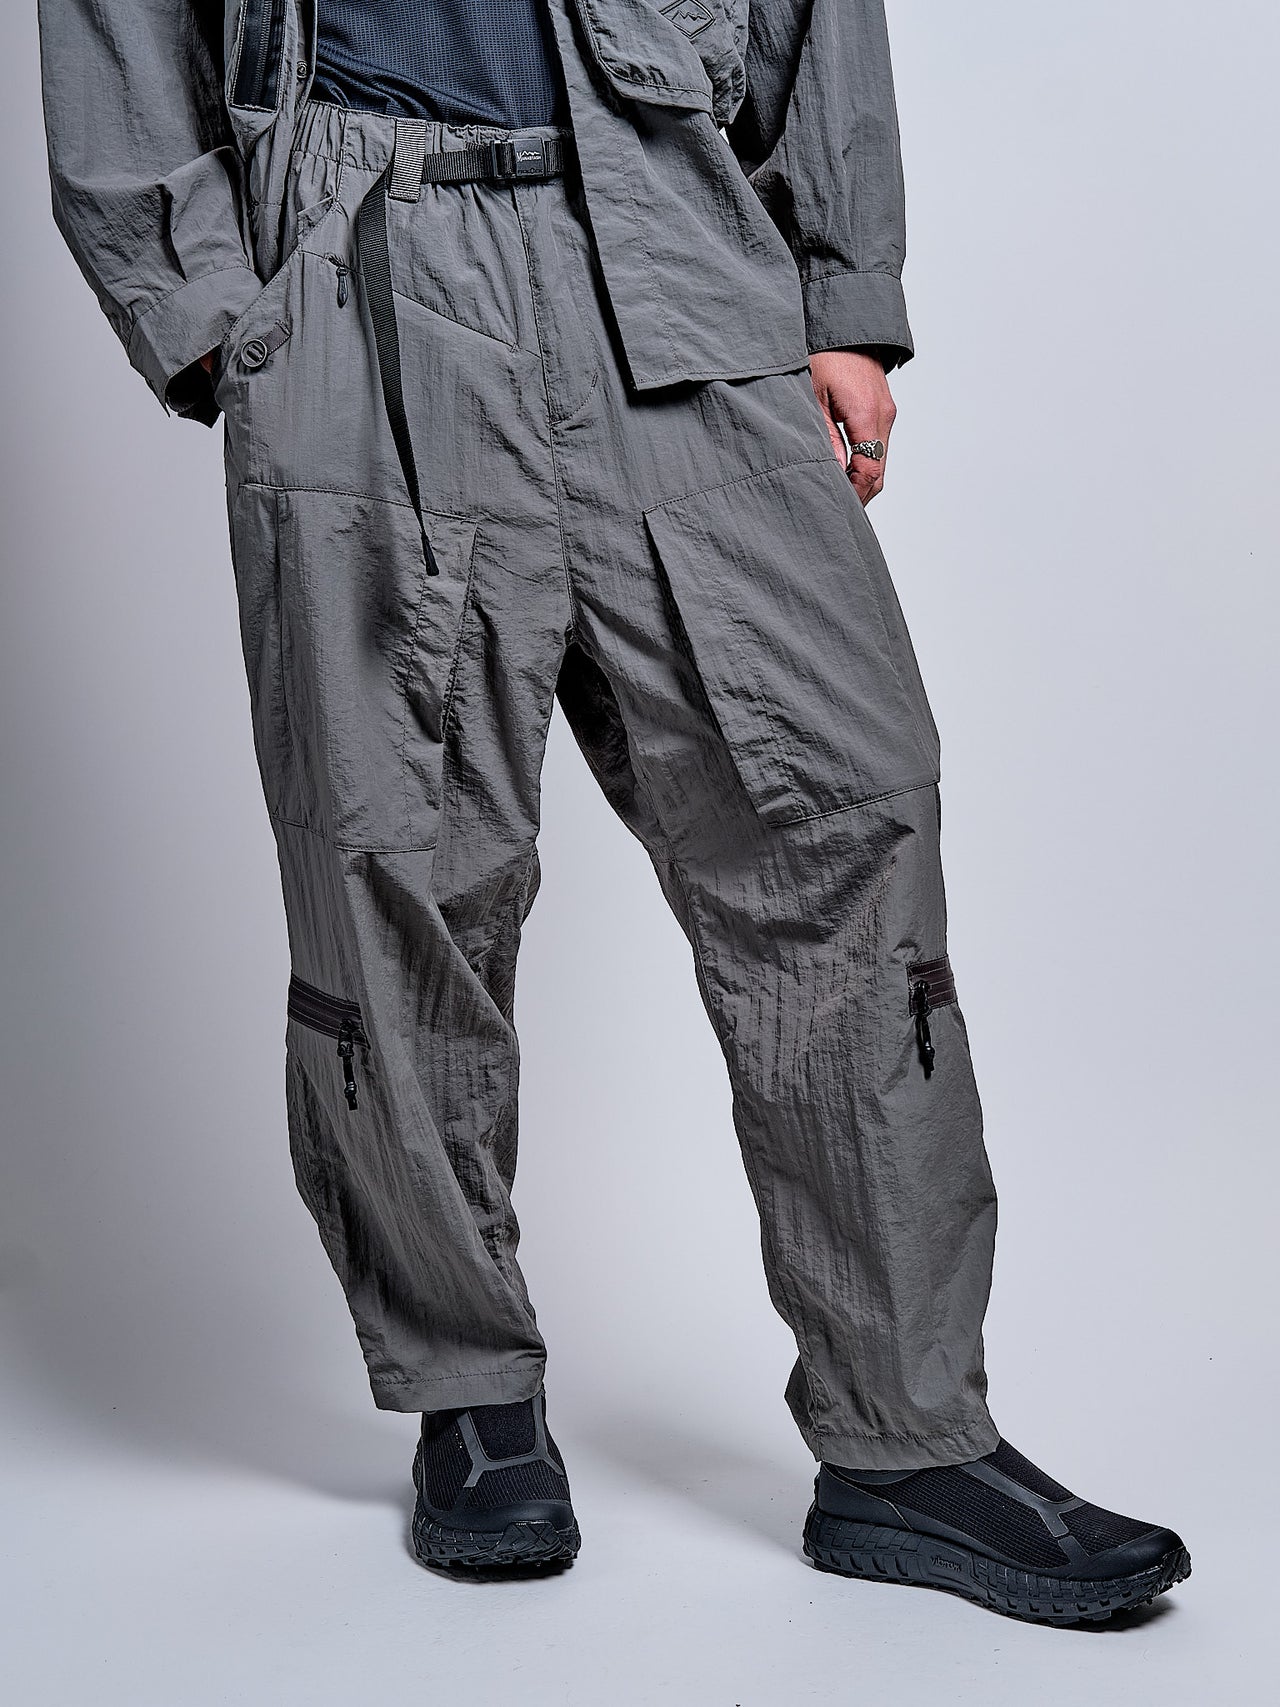 Extra Mile Flight Pant in Grey